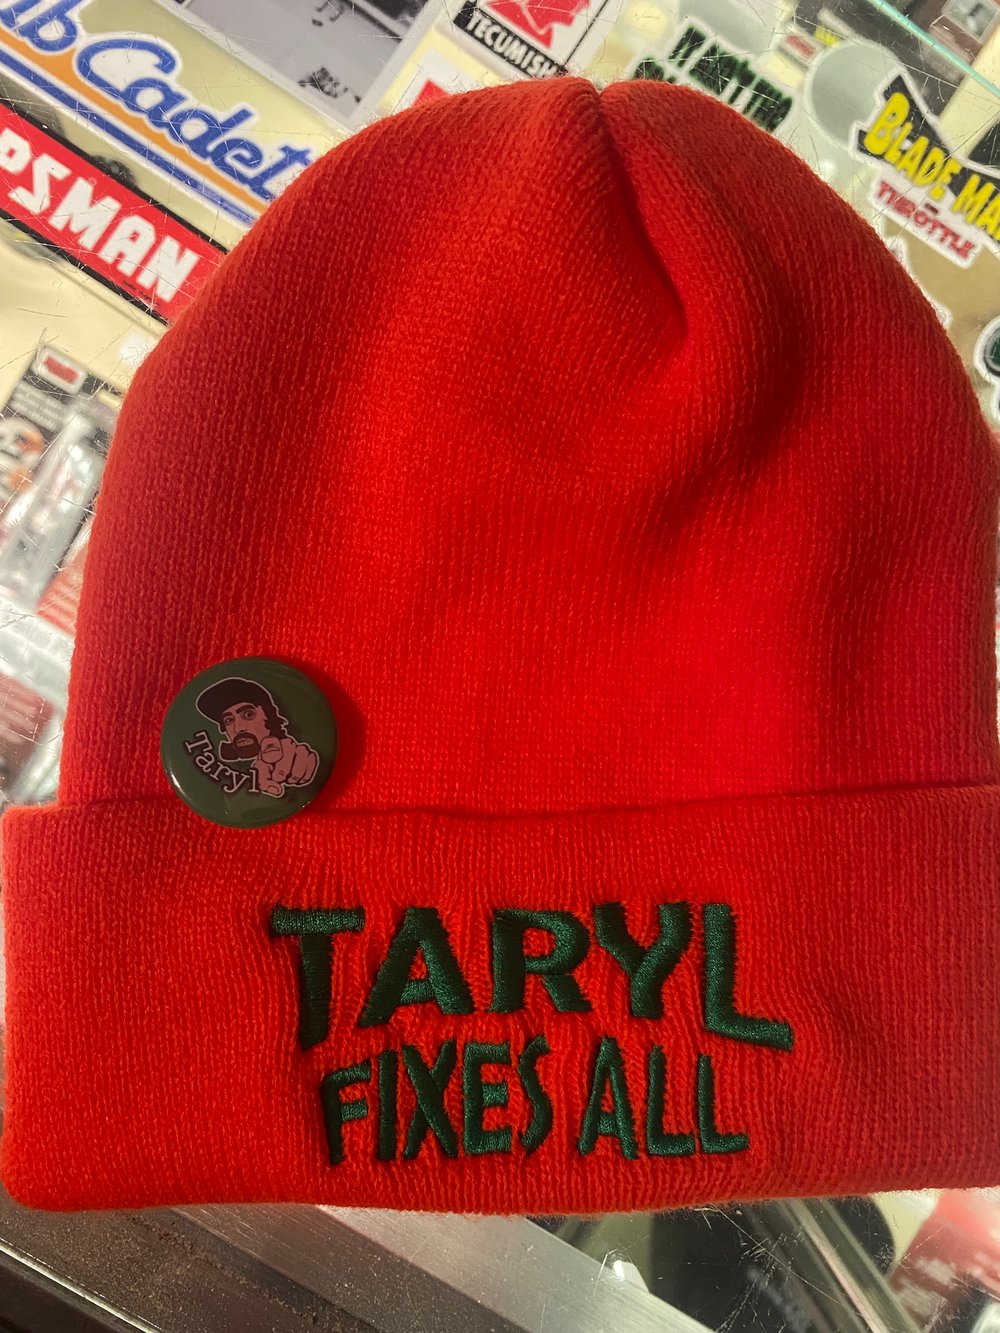 SMALL 1-1/4" TARYL and Co. BUTTONS! Collect ‘em all!